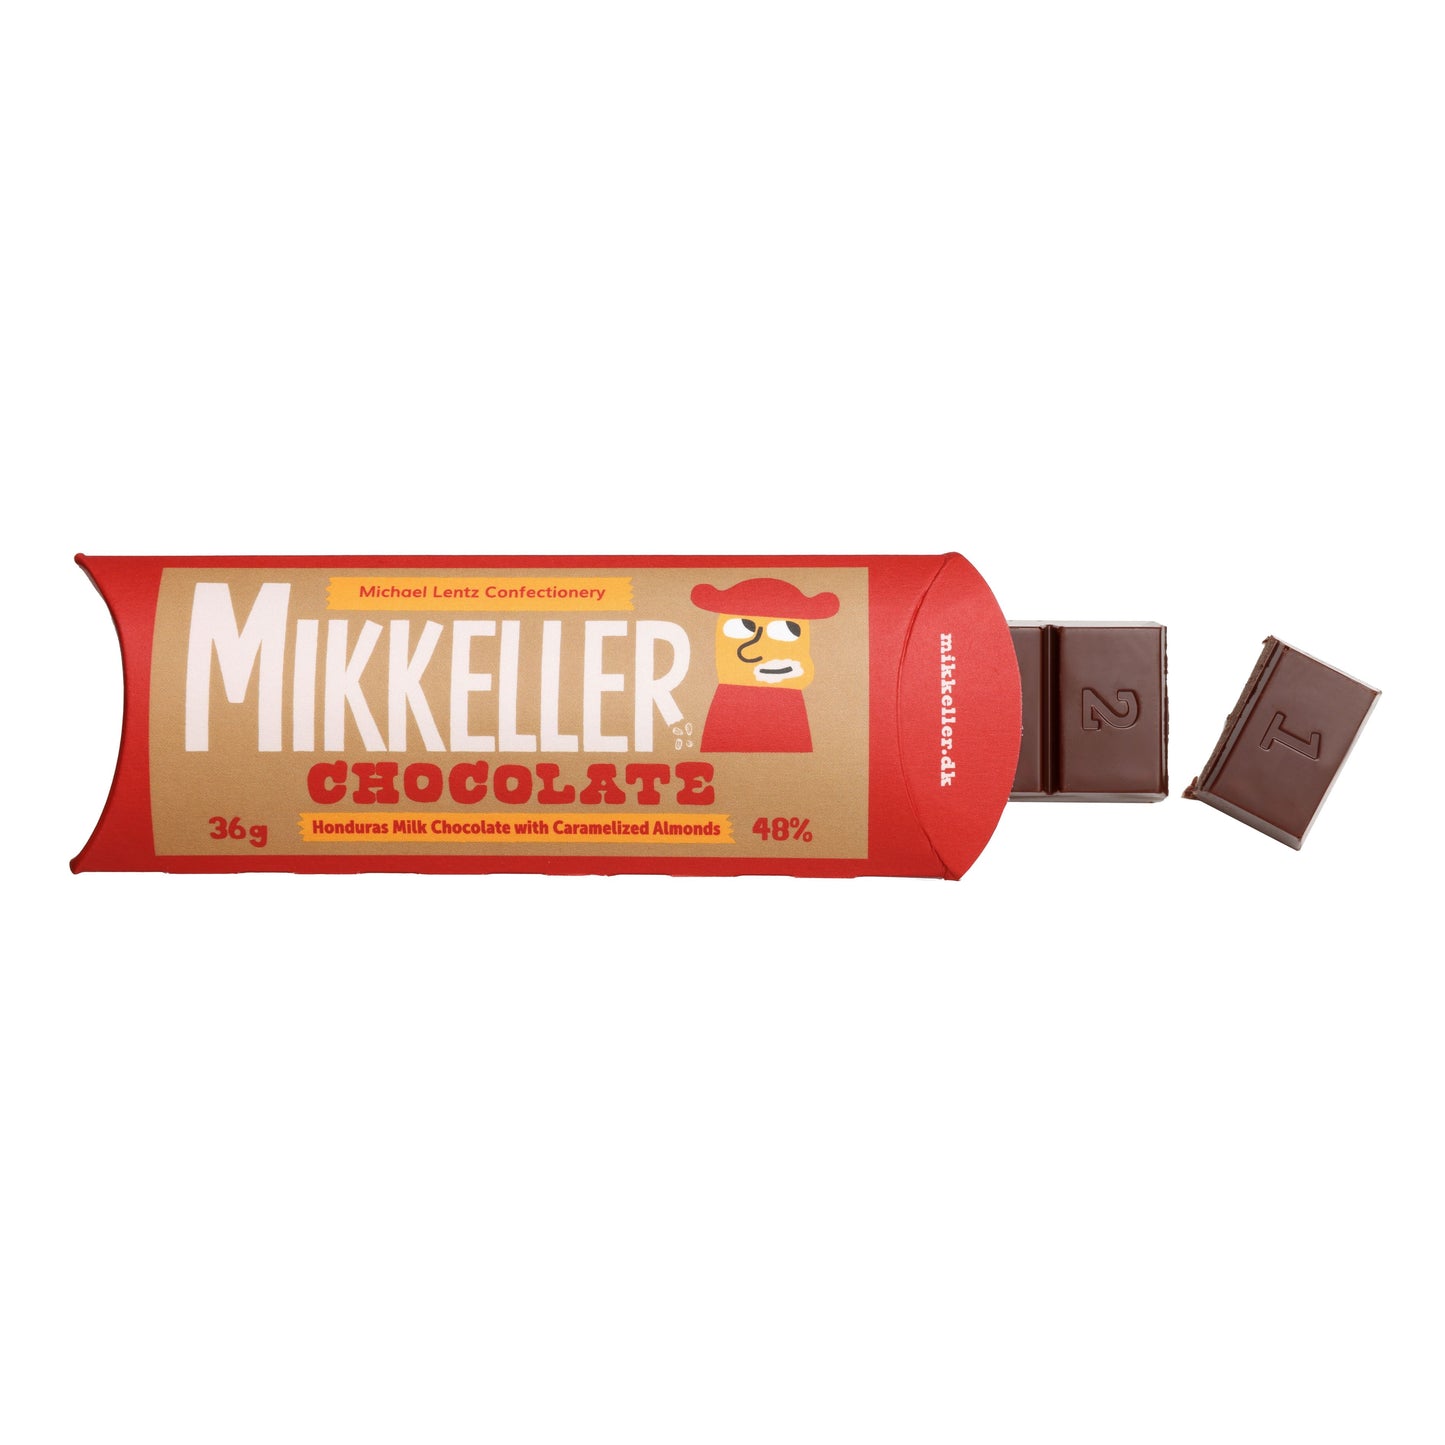 Mikkeller - Milk Chocolate with caramelized Almonds, small bar